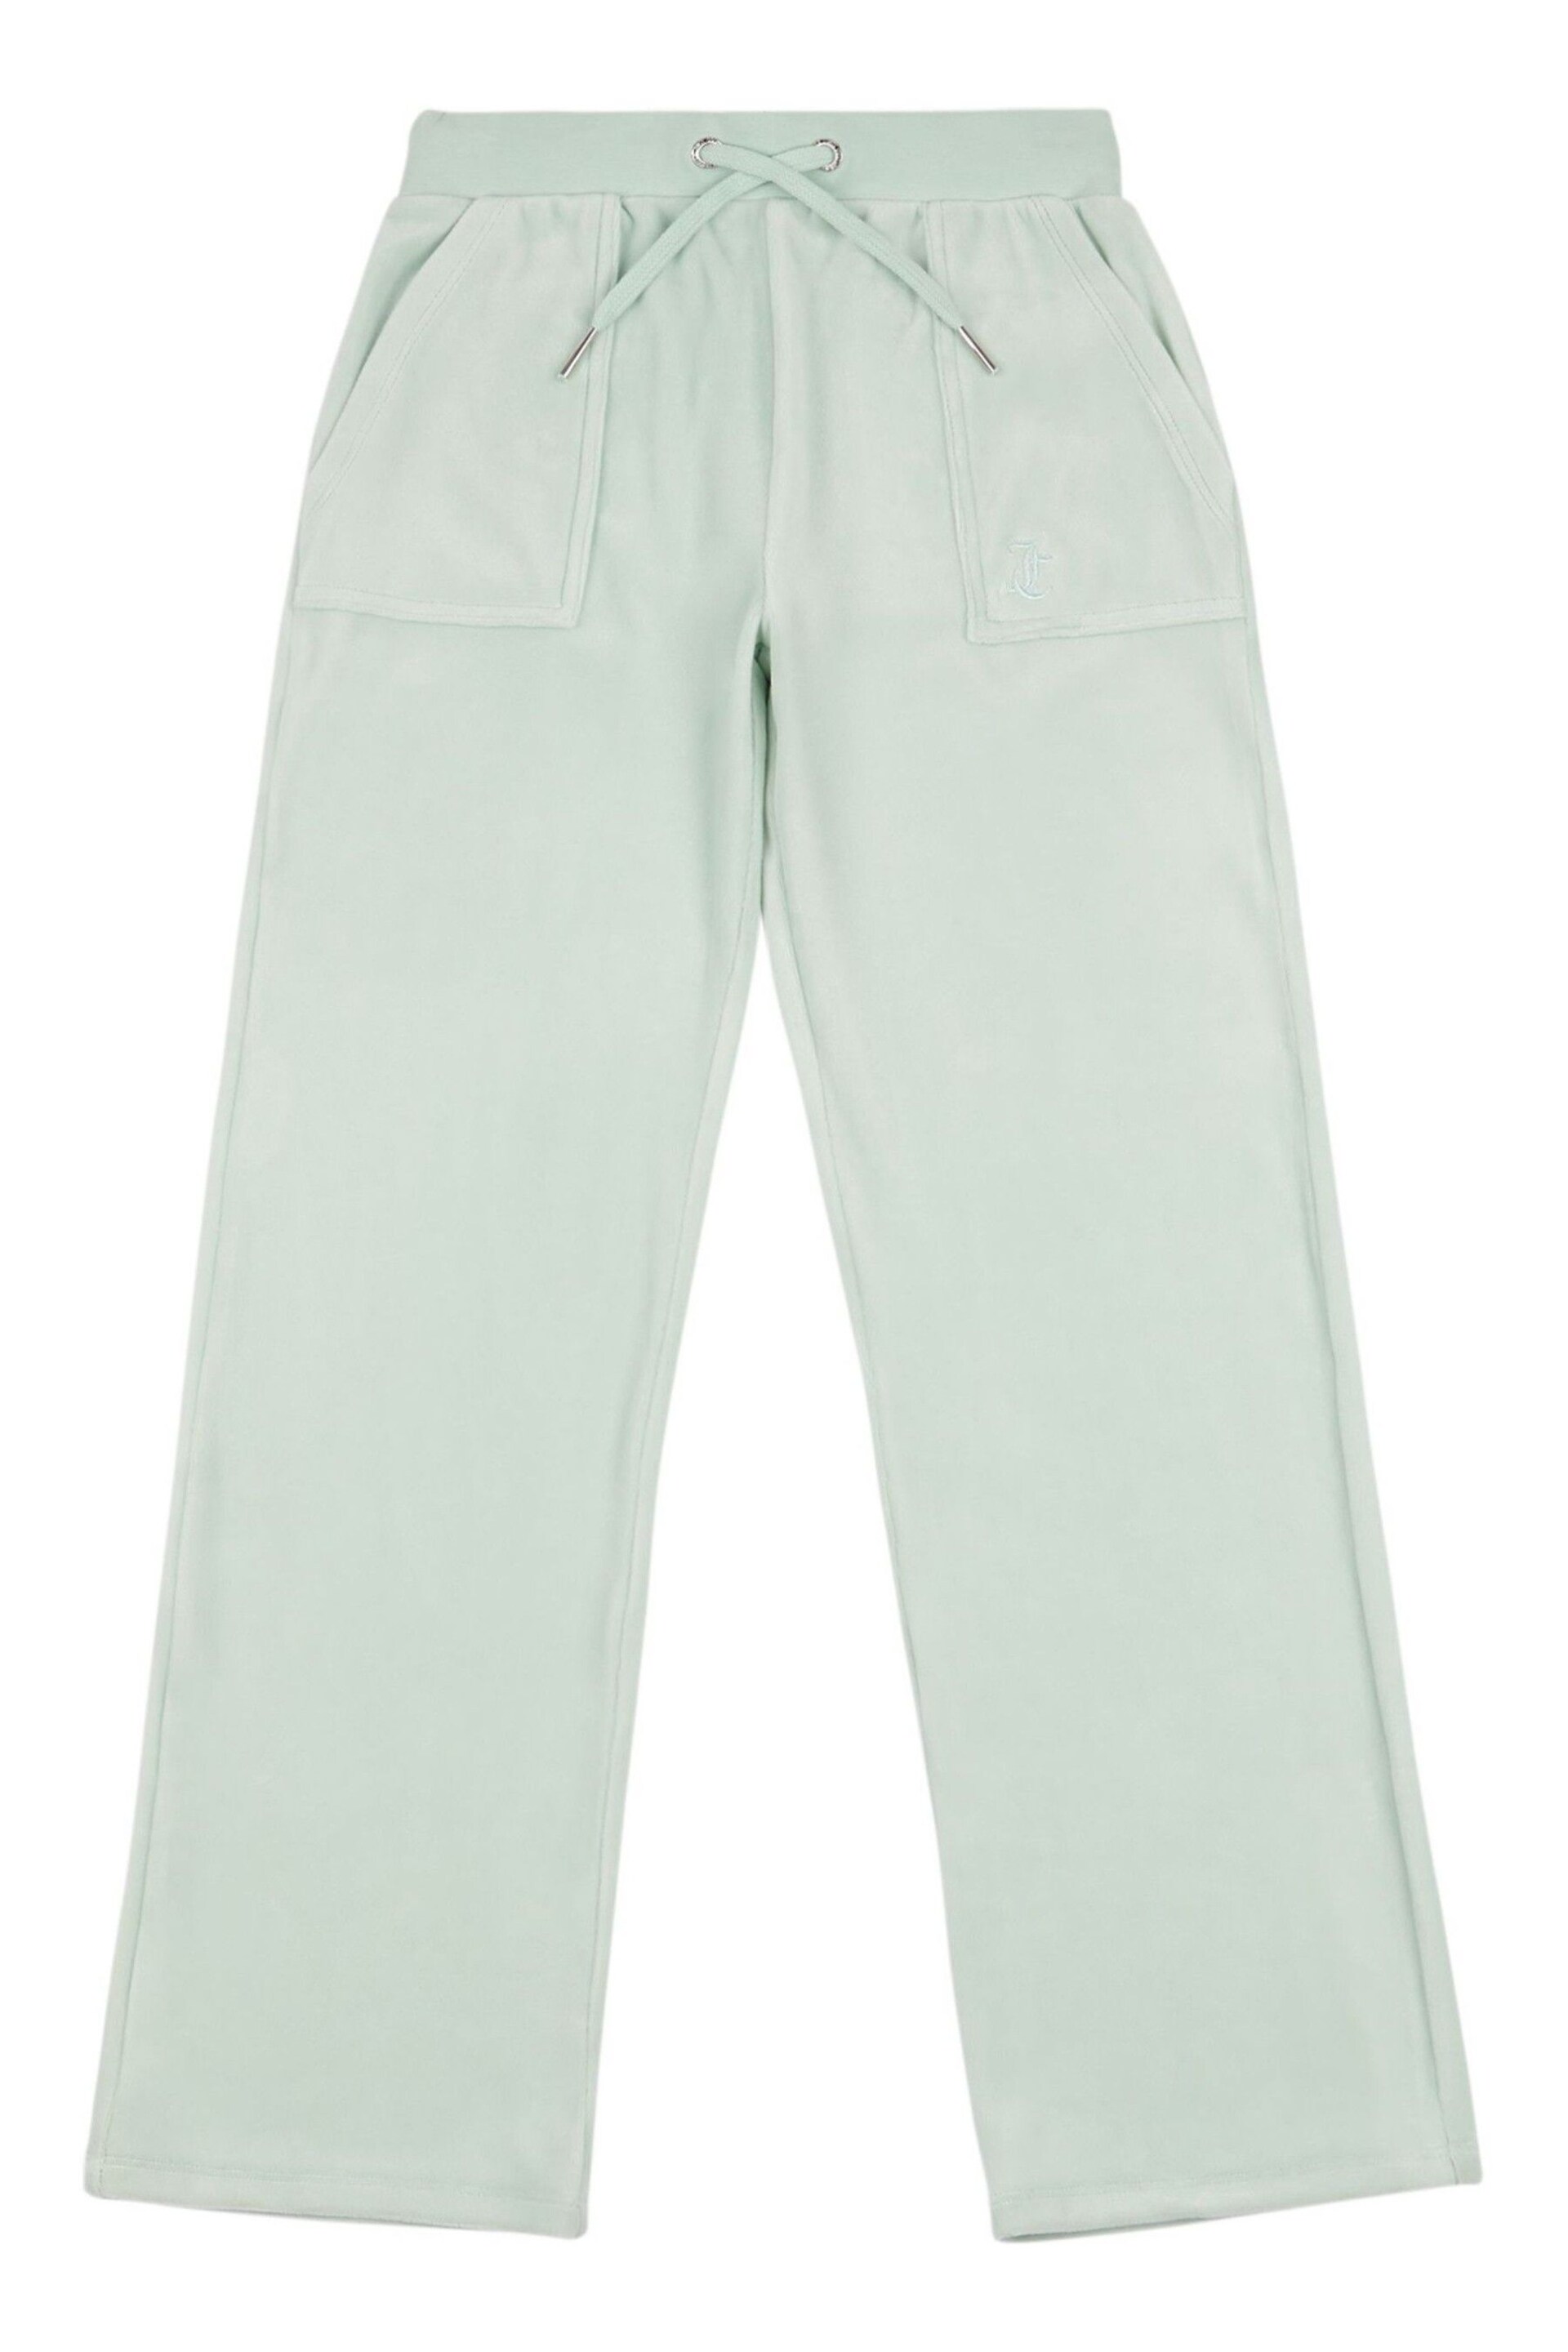 Juicy Couture Tonal Wide Leg Joggers - Image 5 of 7